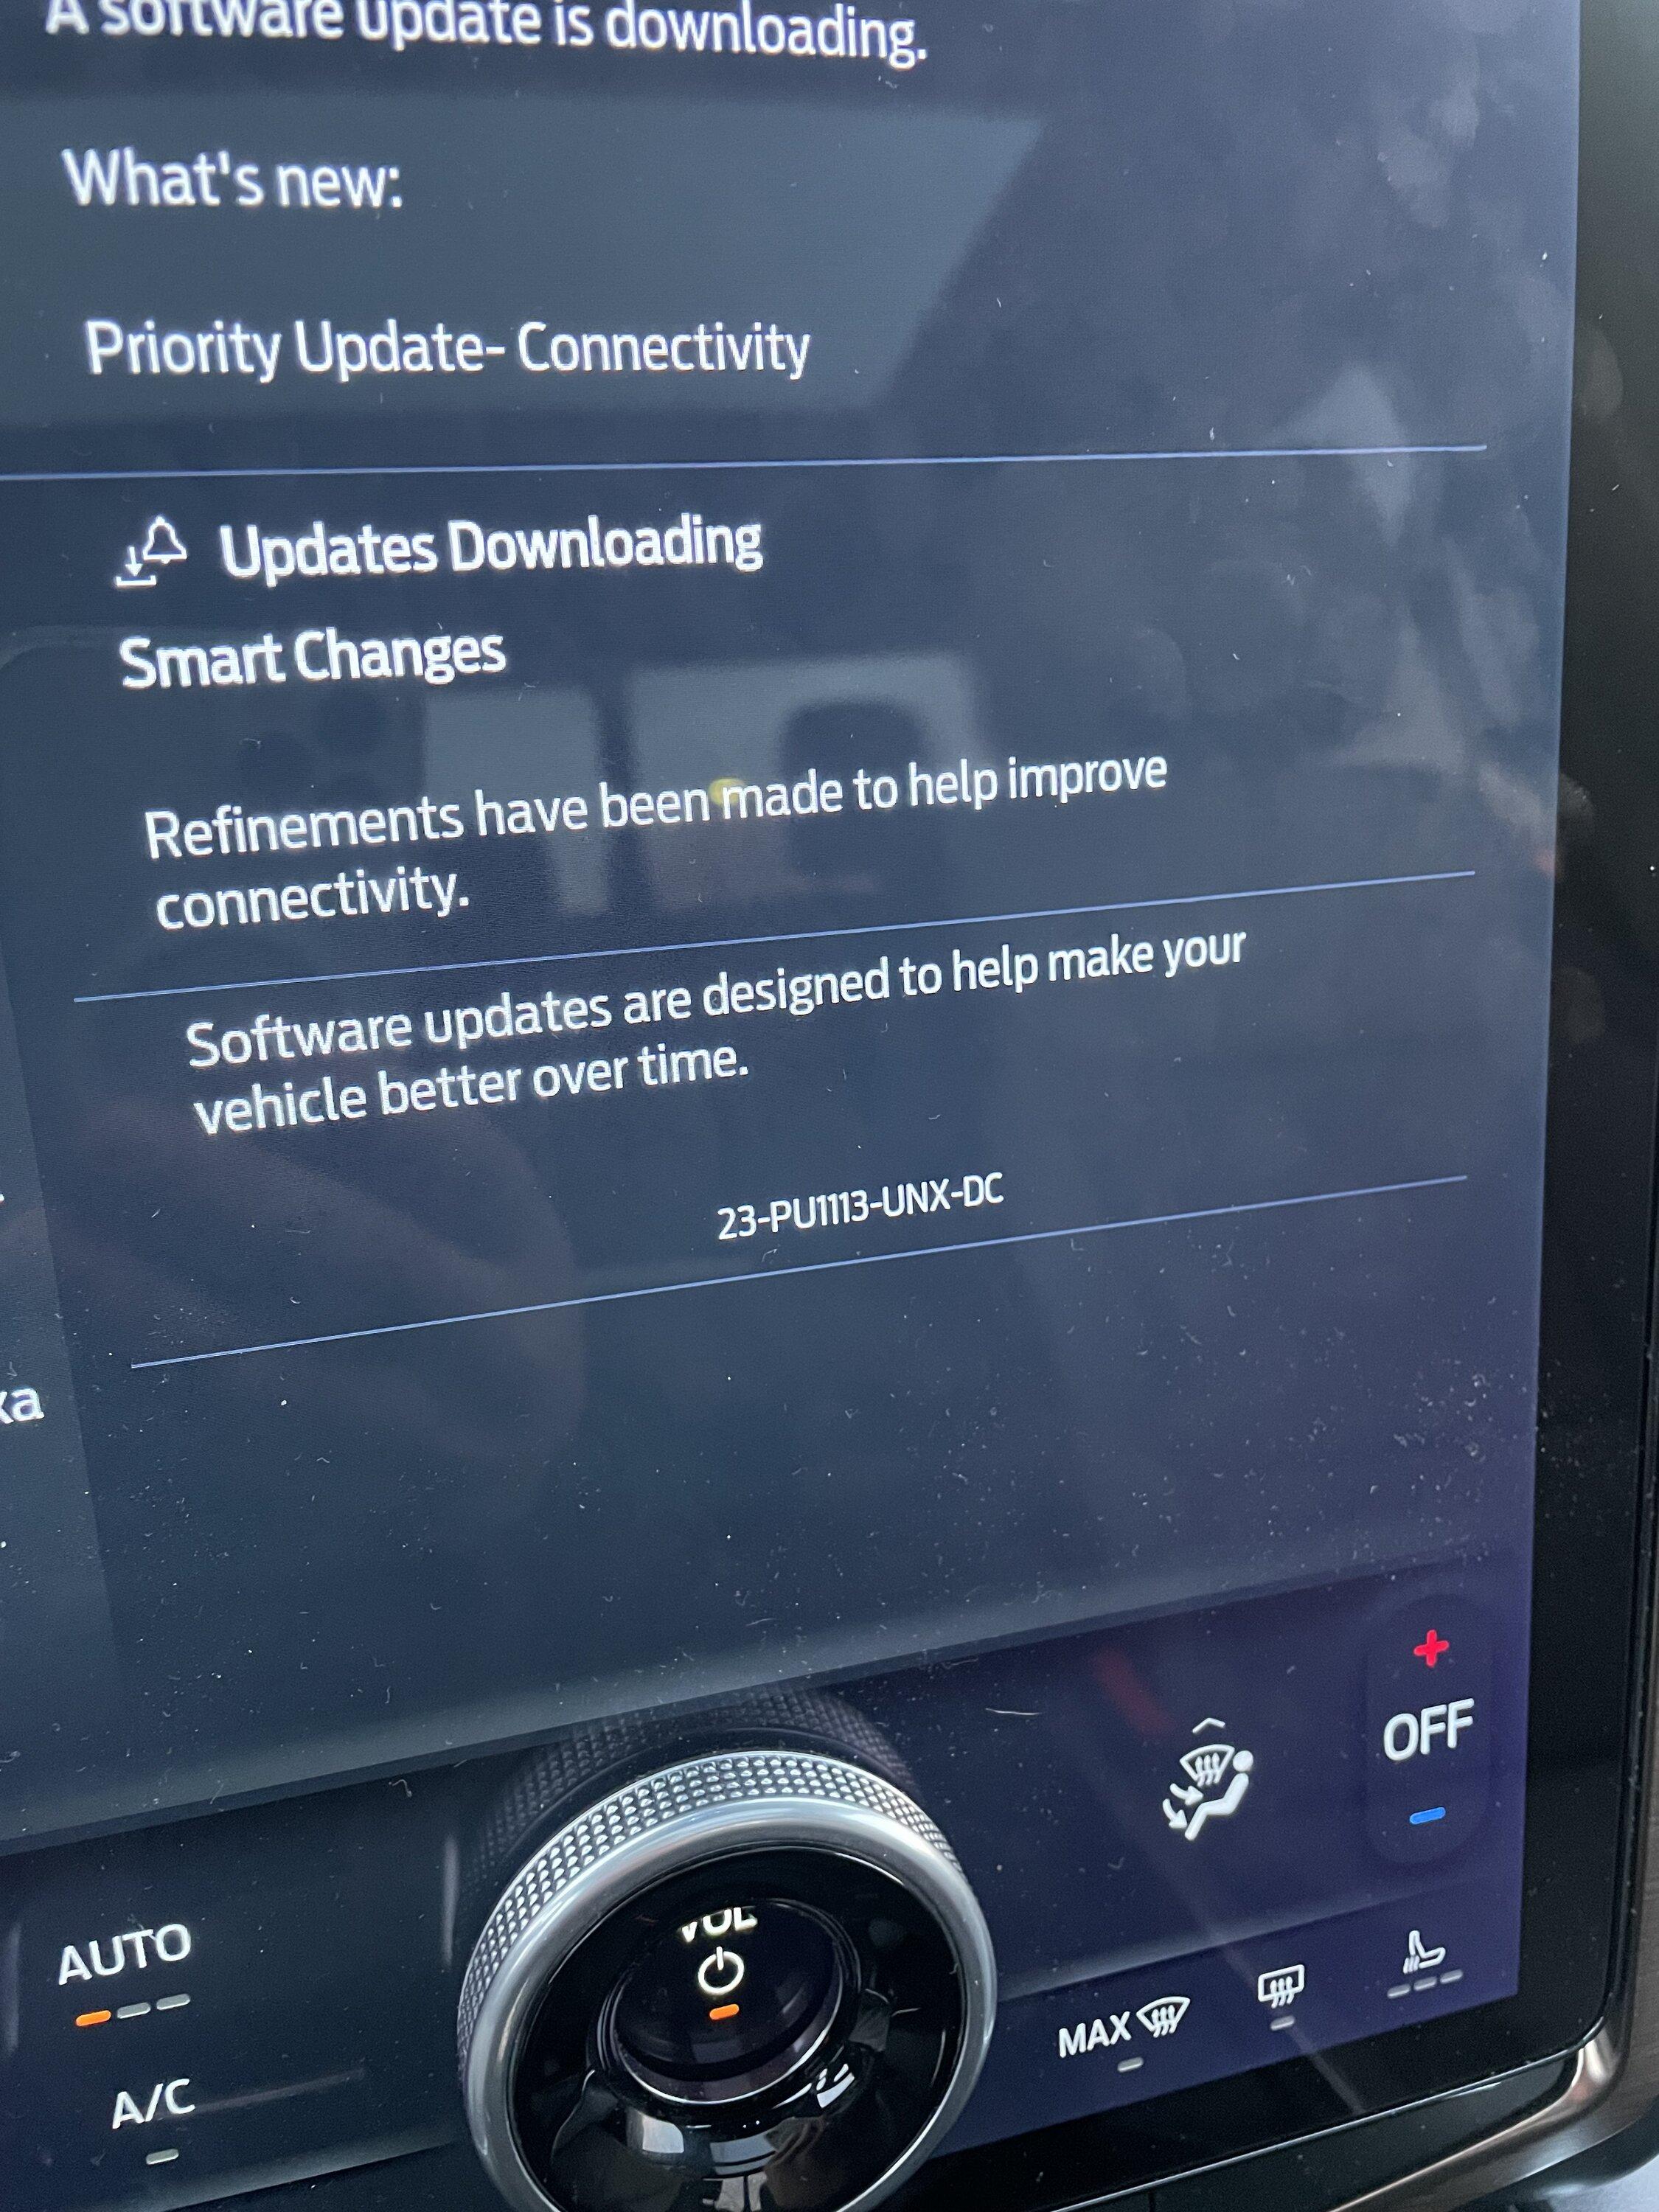 Ford F-150 Lightning Priority Update-23-PU1113-UNX-DC [Connectivity] IMG_0850